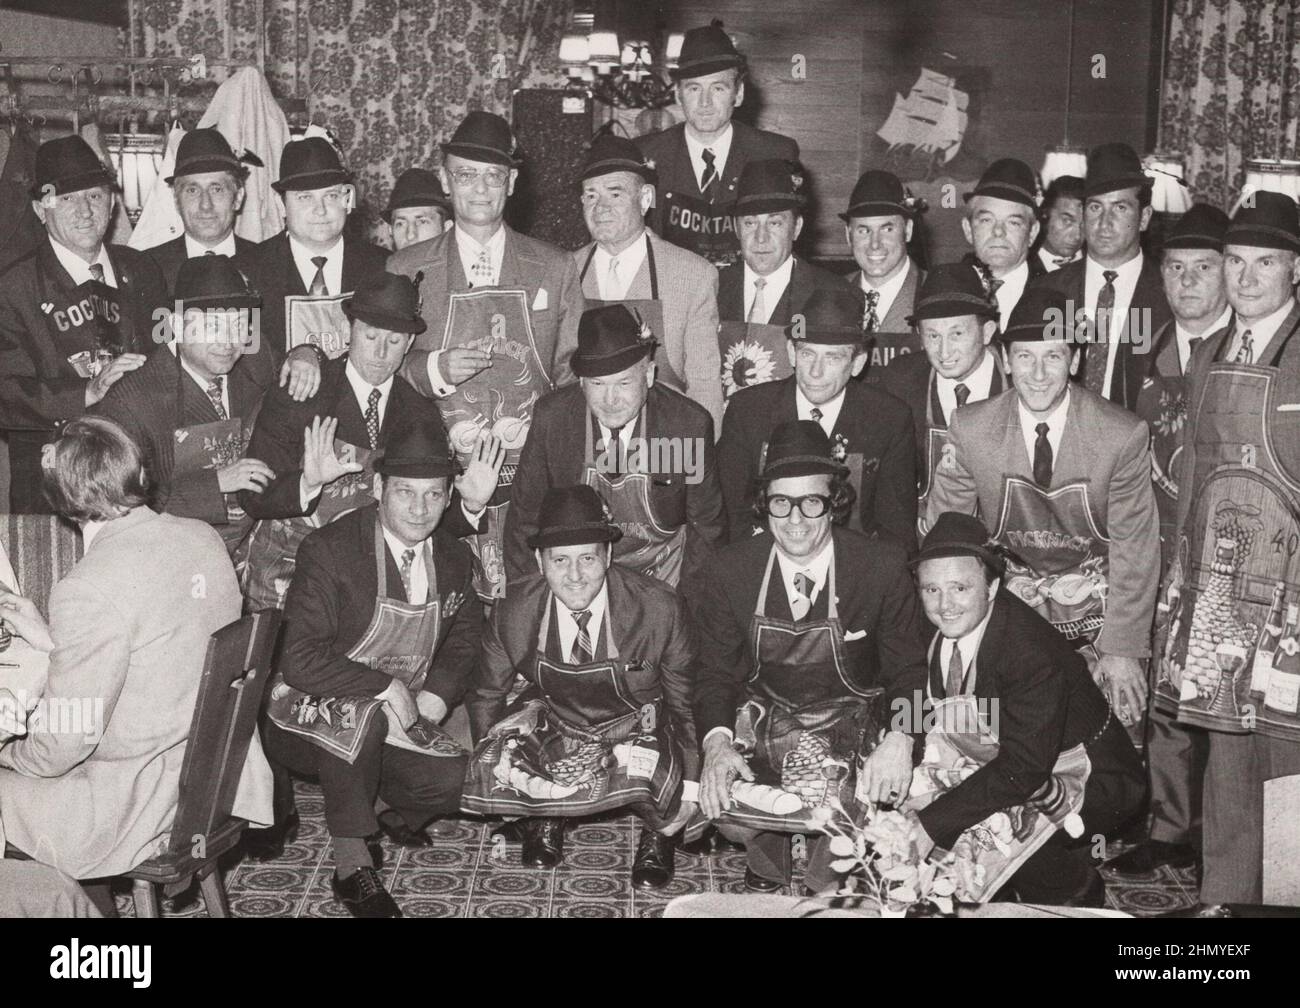 vintage photo about a group of gentlemen / friends whoes are togedher for a cooking course at Austria or Germany. source: original photographs ADDITIONAL-RIGHTS-CLEARANCE-INFO-NOT-AVAILABLE Stock Photo